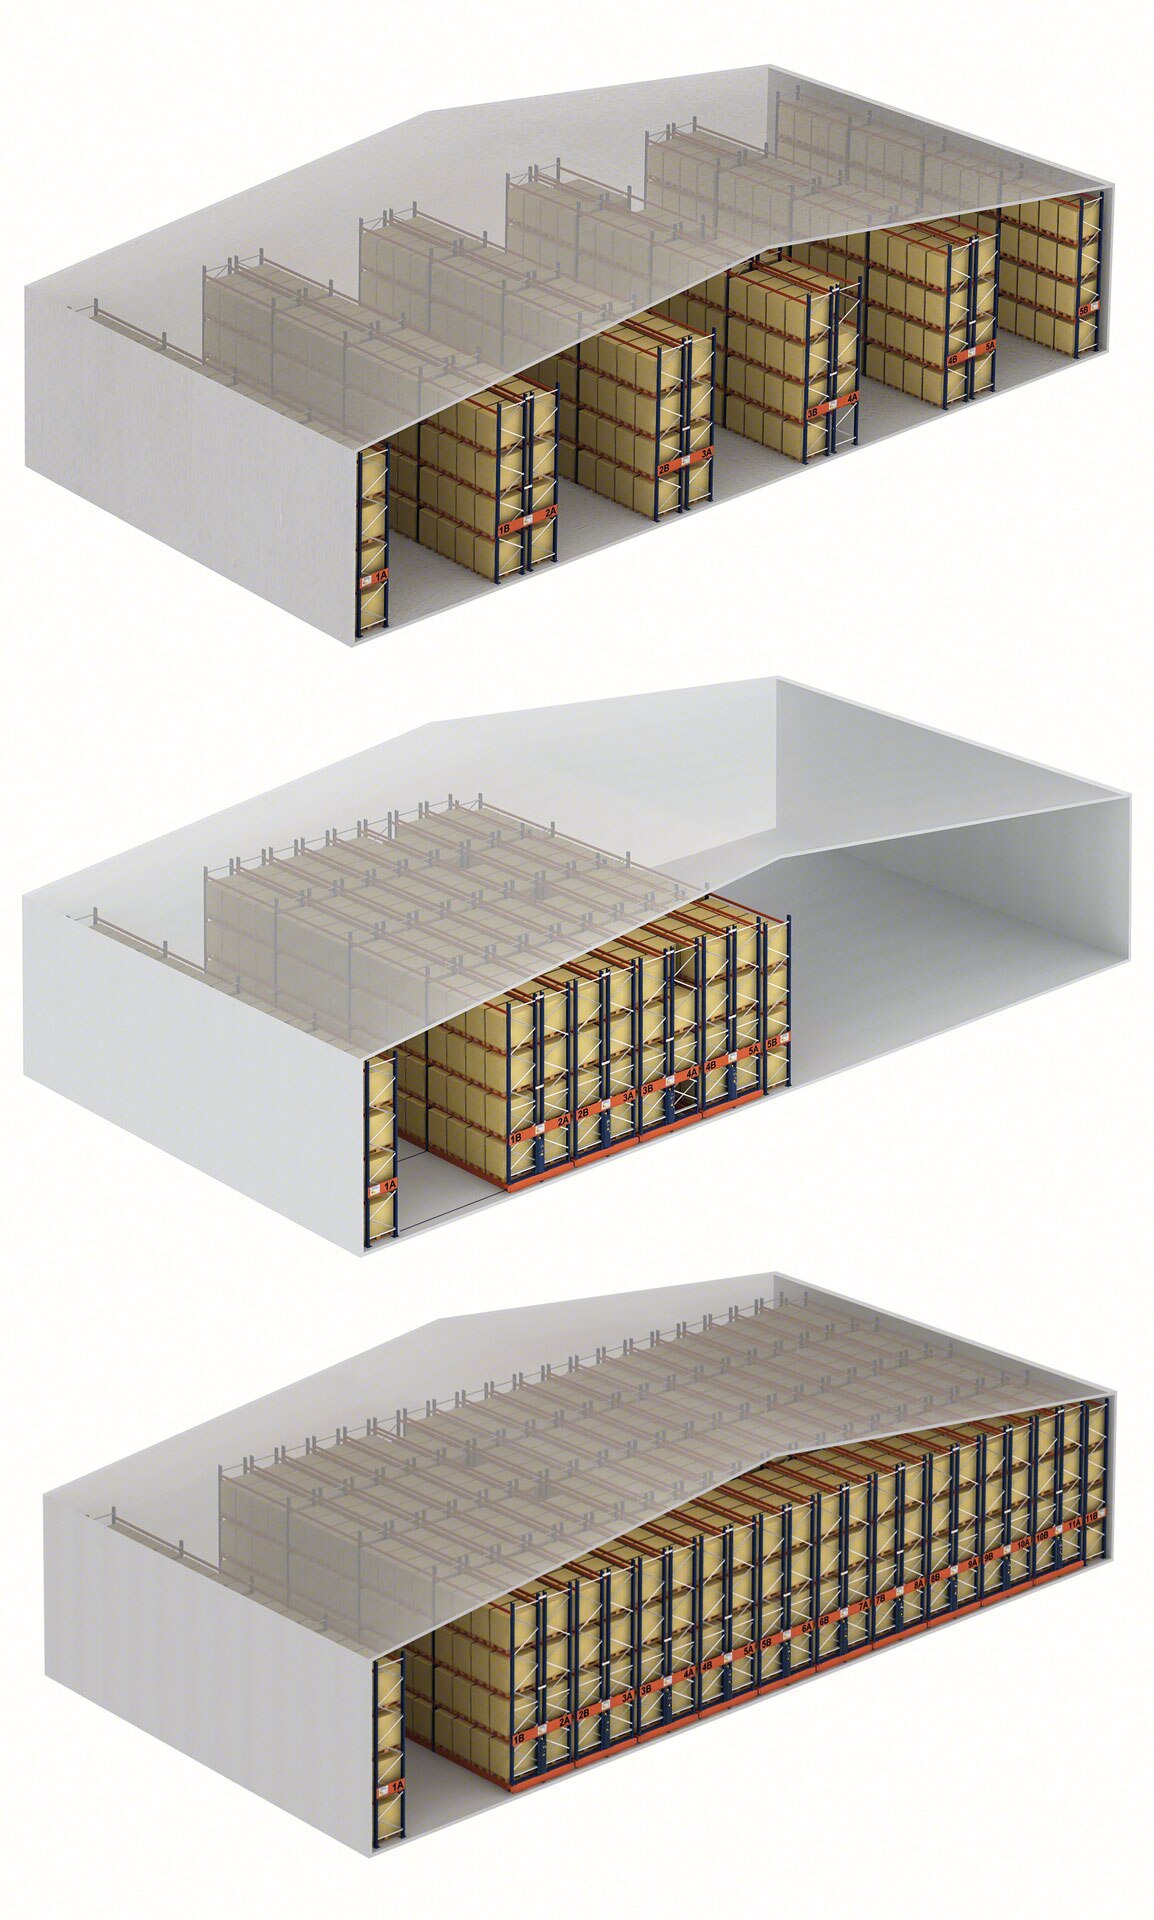 The Movirack system saves space compared to conventional pallet racking